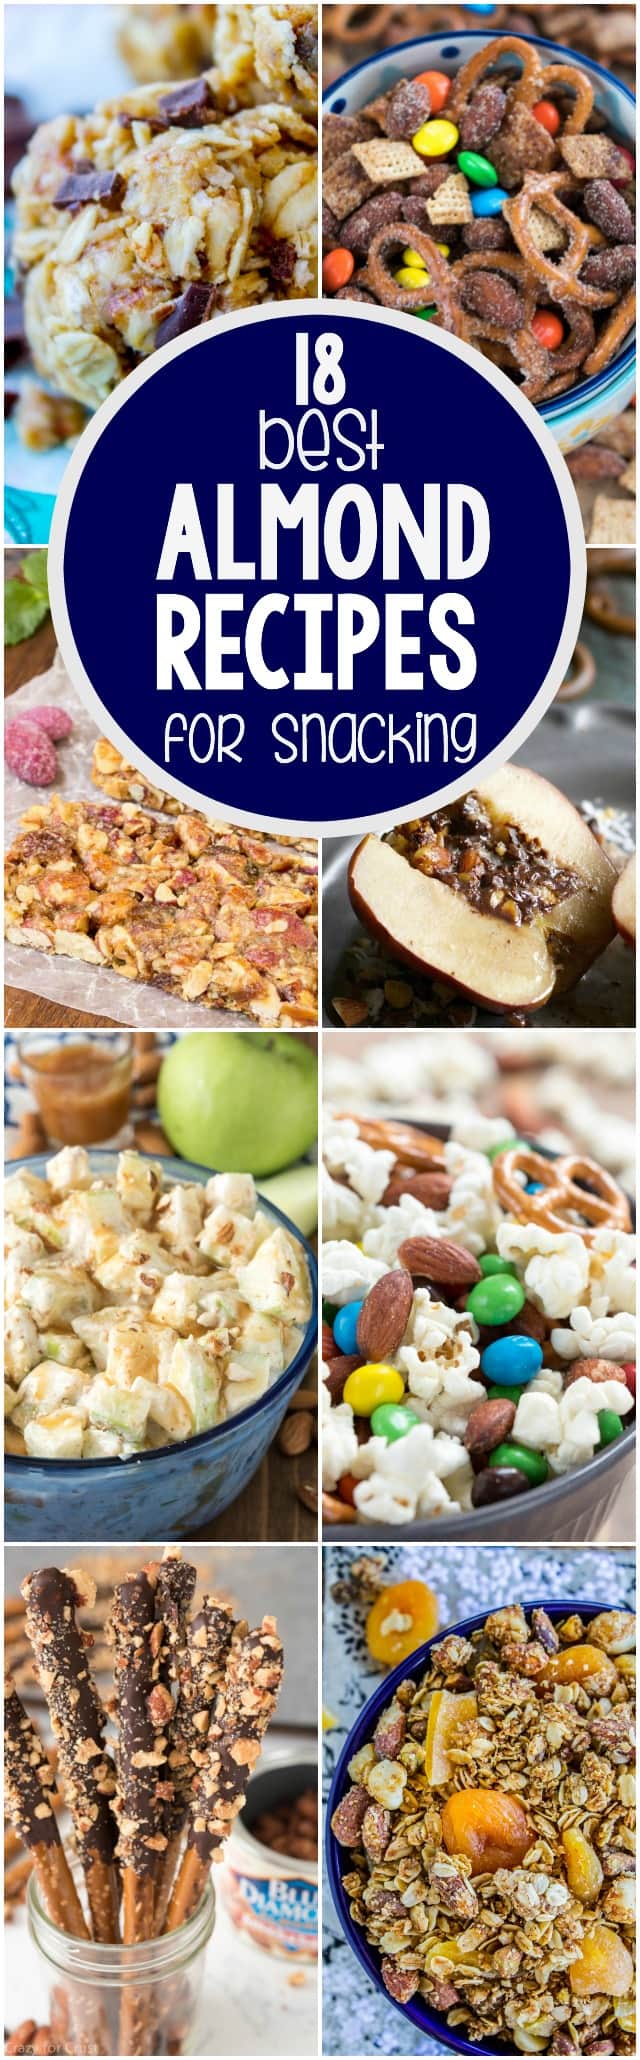 18 Best Almond Recipes for Snacking - these are the perfect sometimes skinnier recipes to use your favorite almonds!